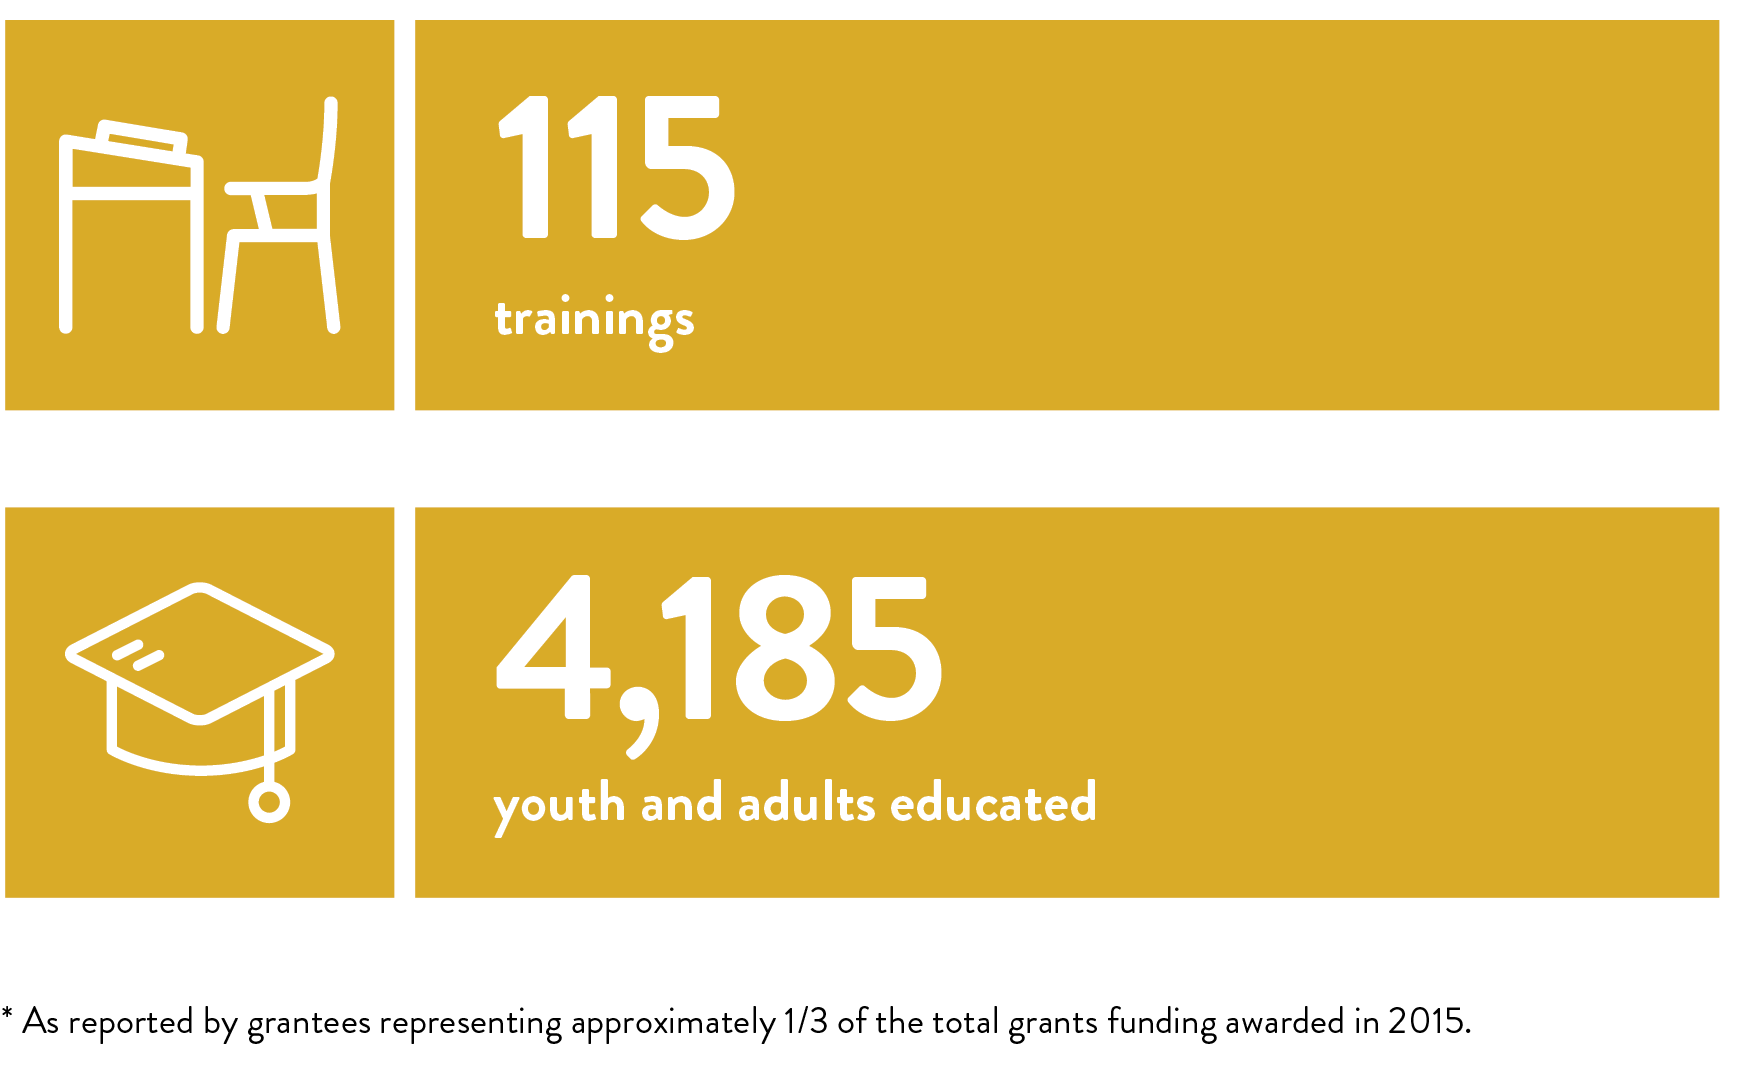 115 trainings; 4,185 youth and adults educated